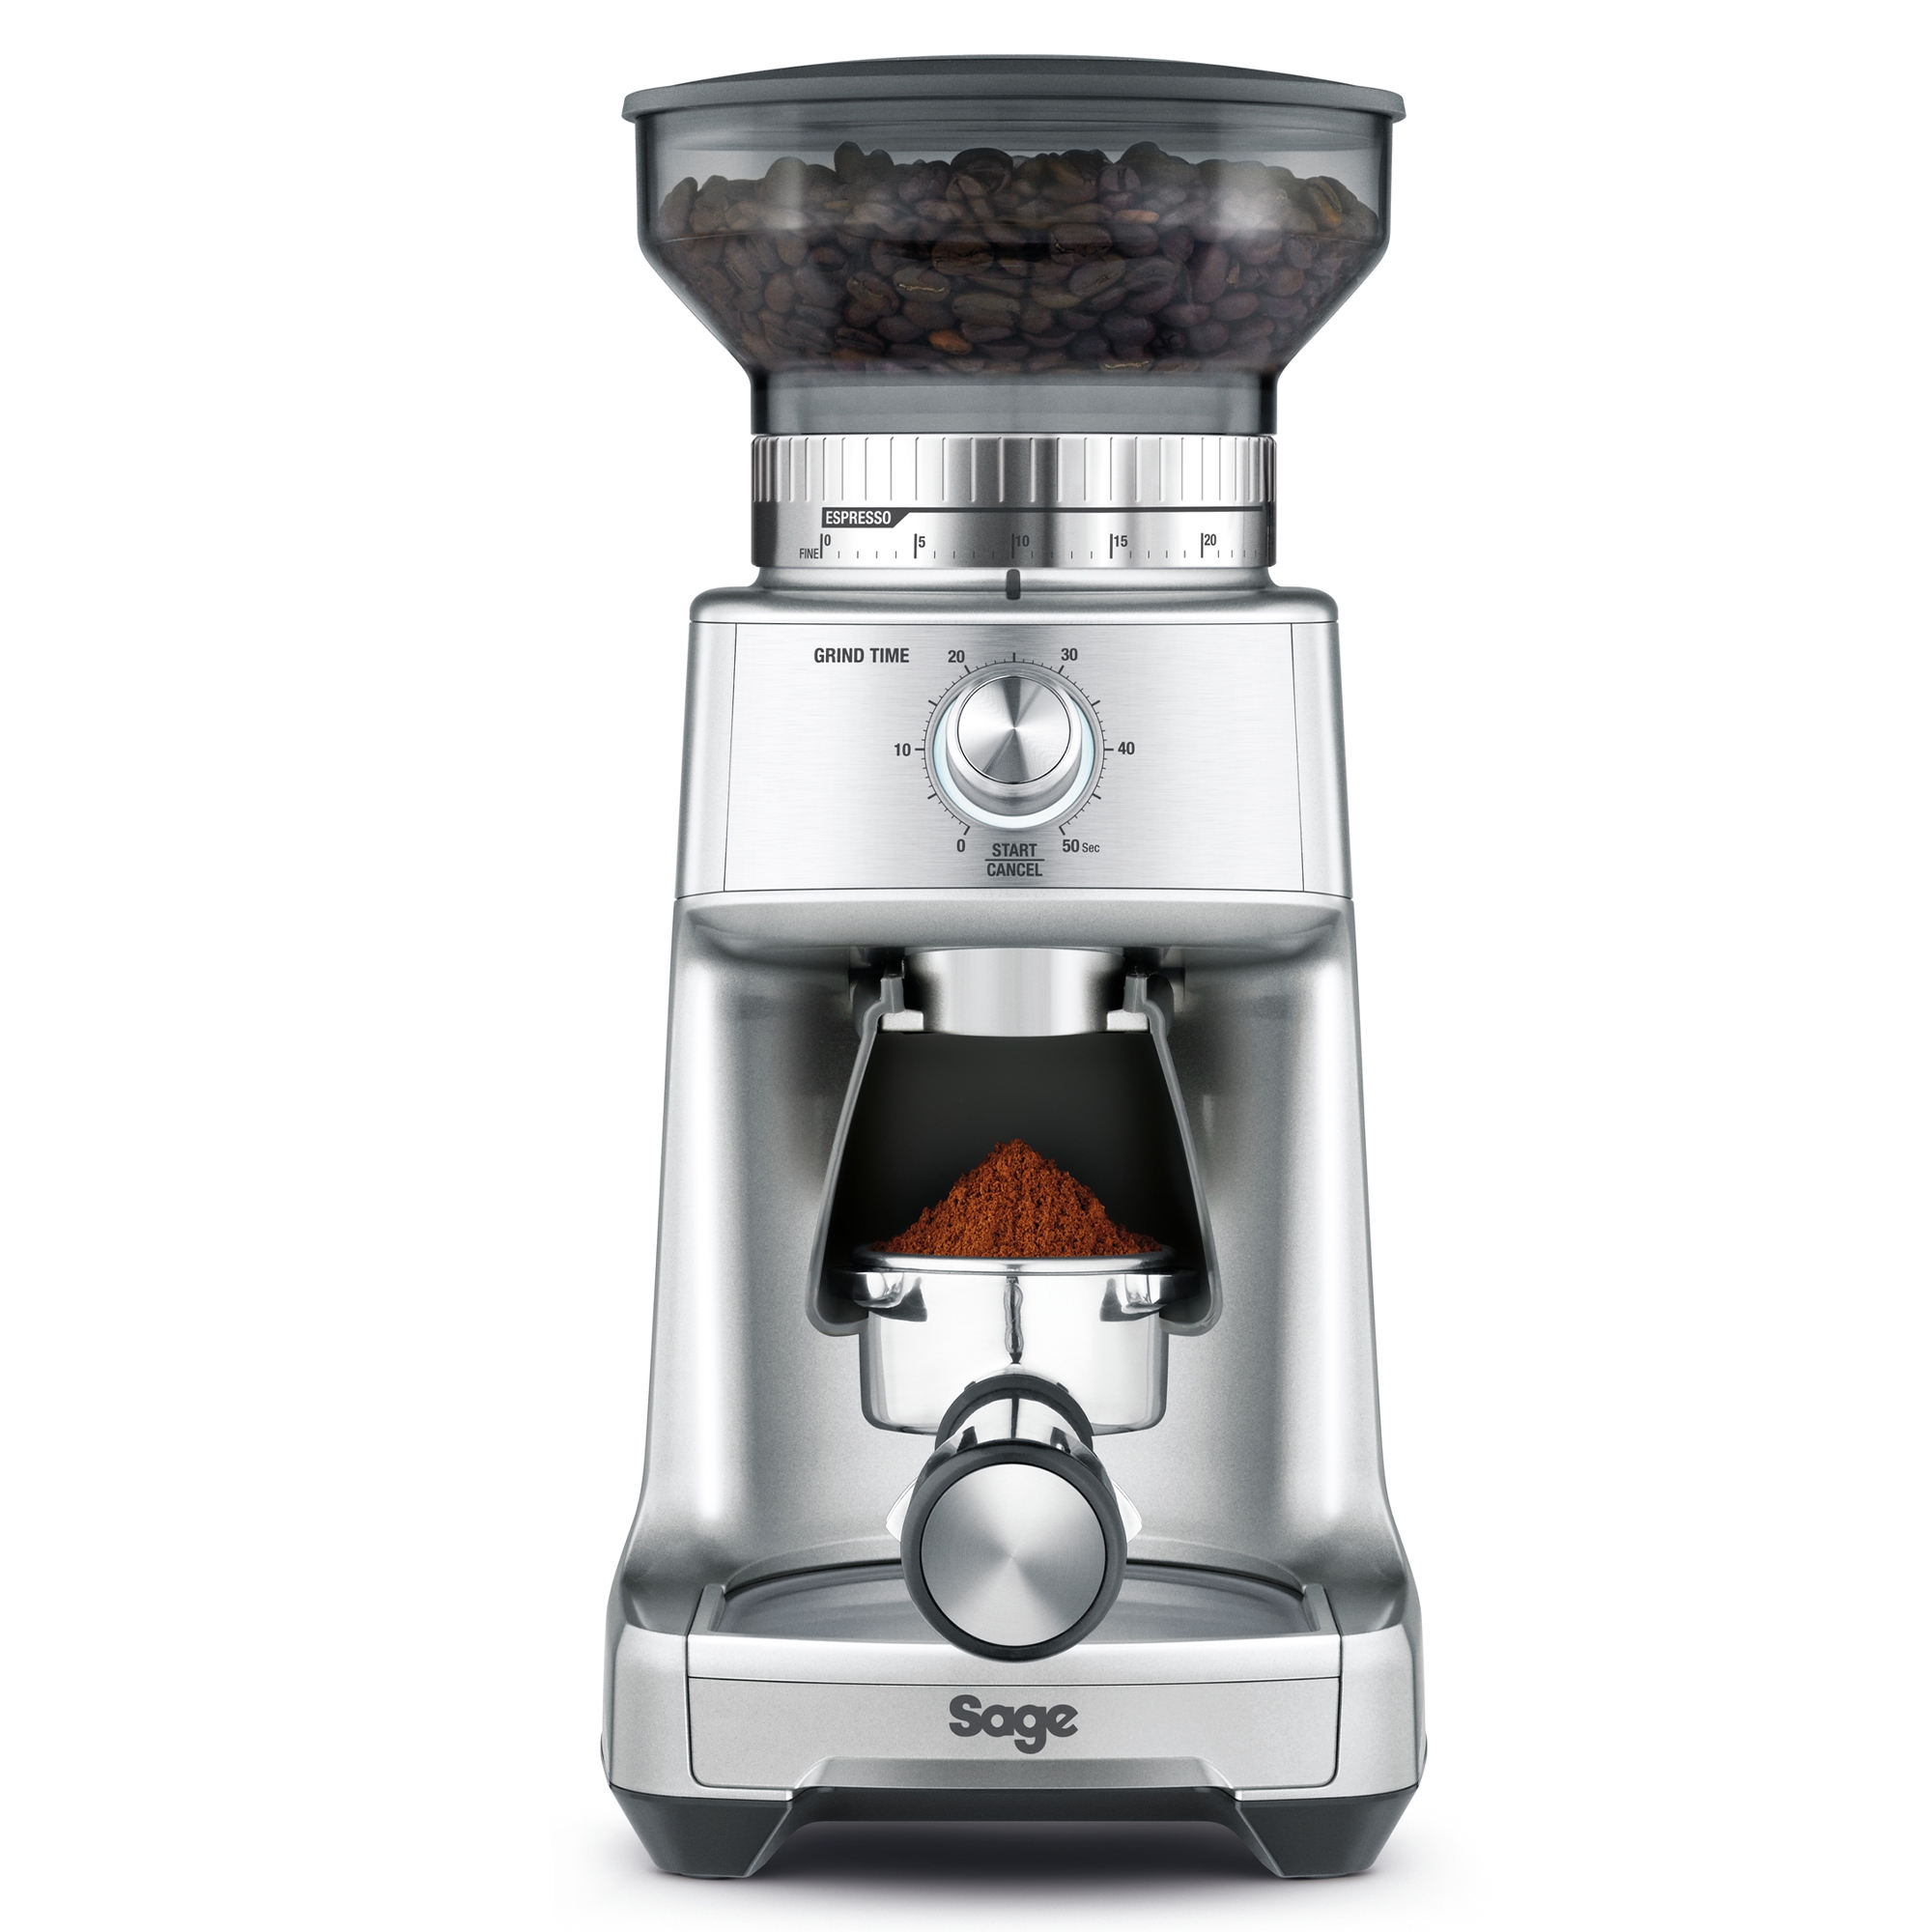 SAGE - Coffee Grinder - The Dose Control™ Pro